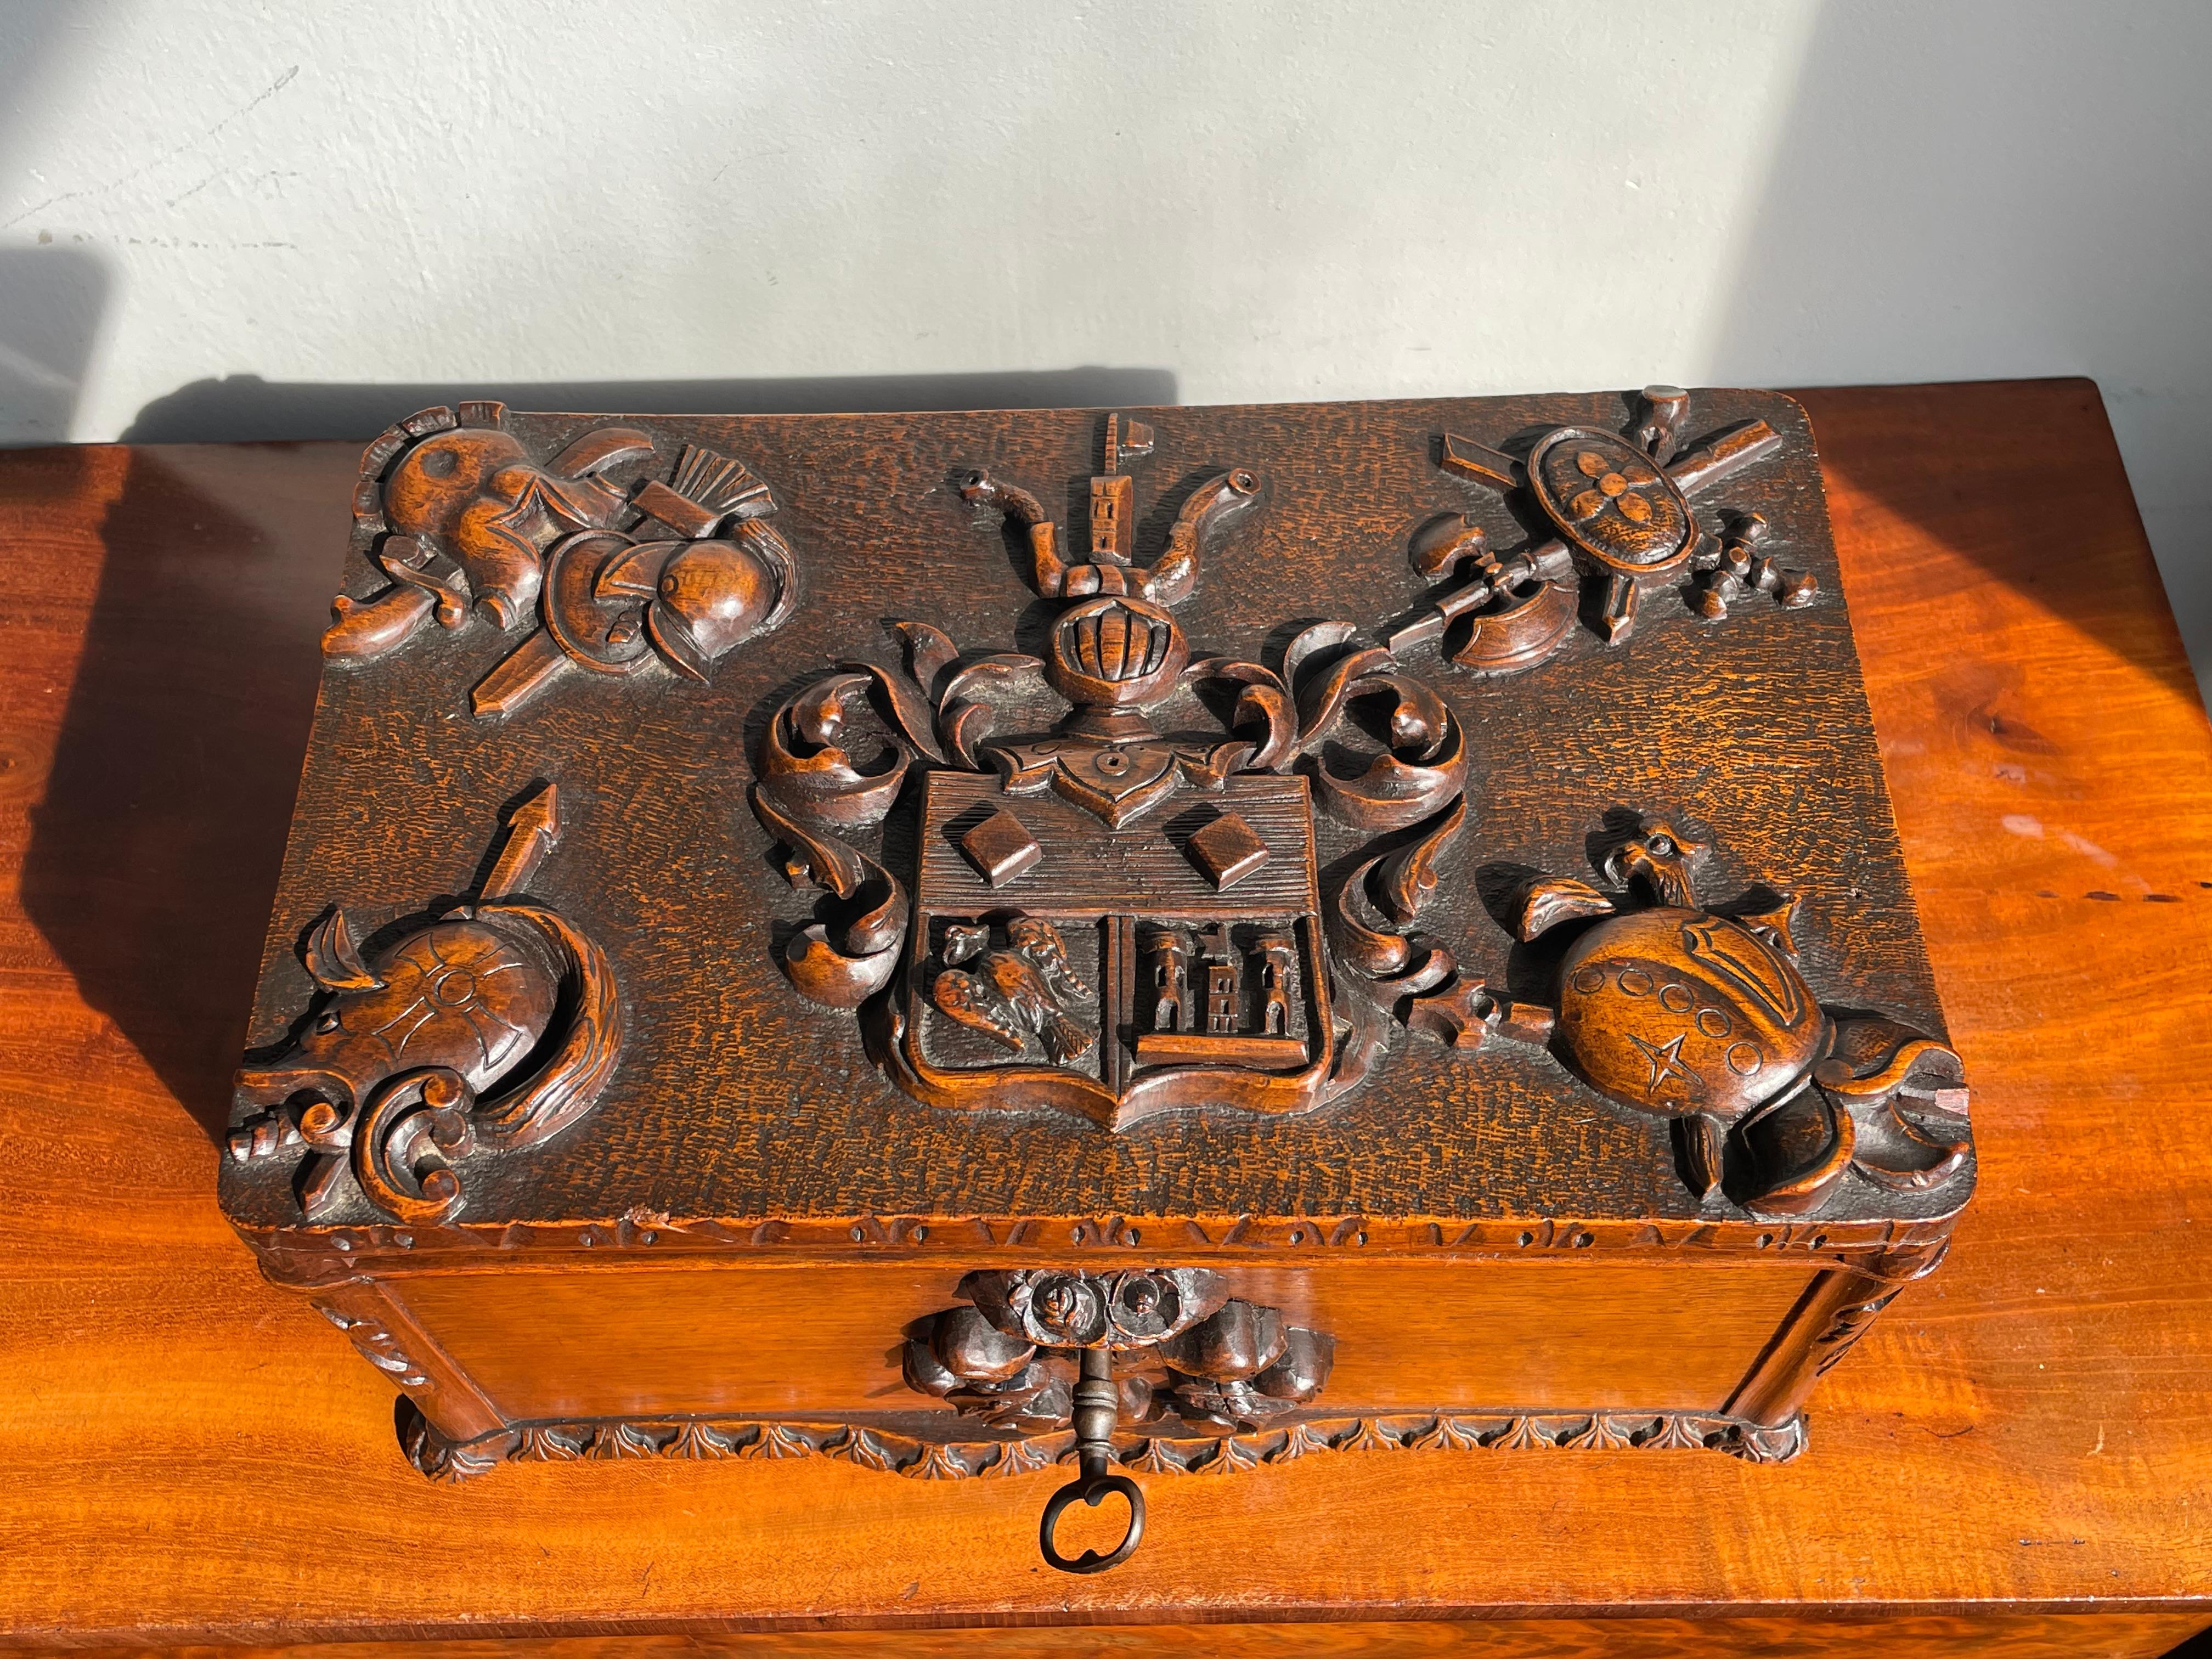 Stunning, highly decorative and good size Heraldic box from circa 1860.

If you are a collector of truly beautiful and rare antique boxes then you will love this mid 19th century, multi-purpose box. The first thing that draws your attention is the